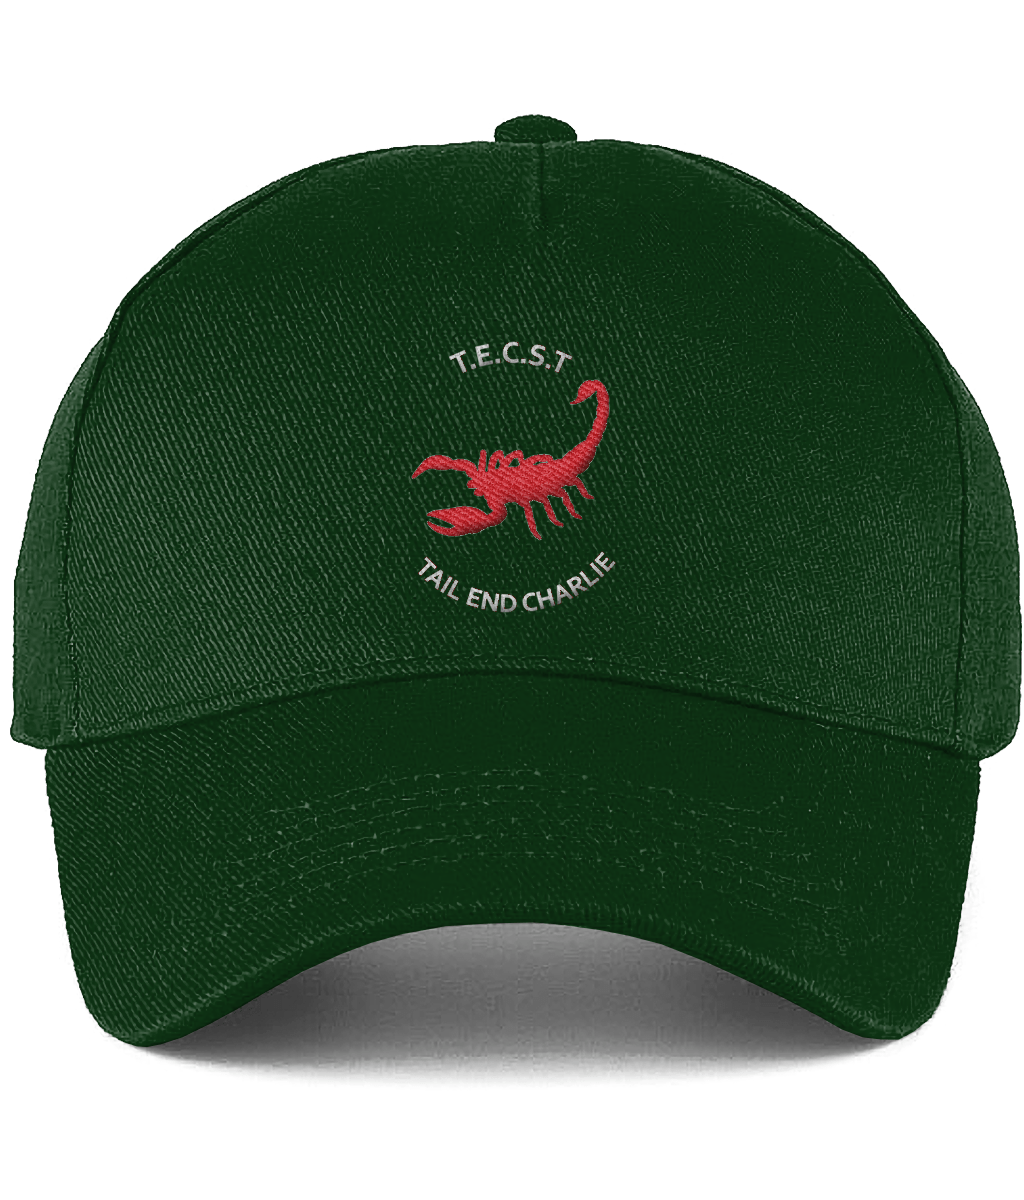 TAIL END CHARLIE Embroidered Ultimate Cotton Panel Cap